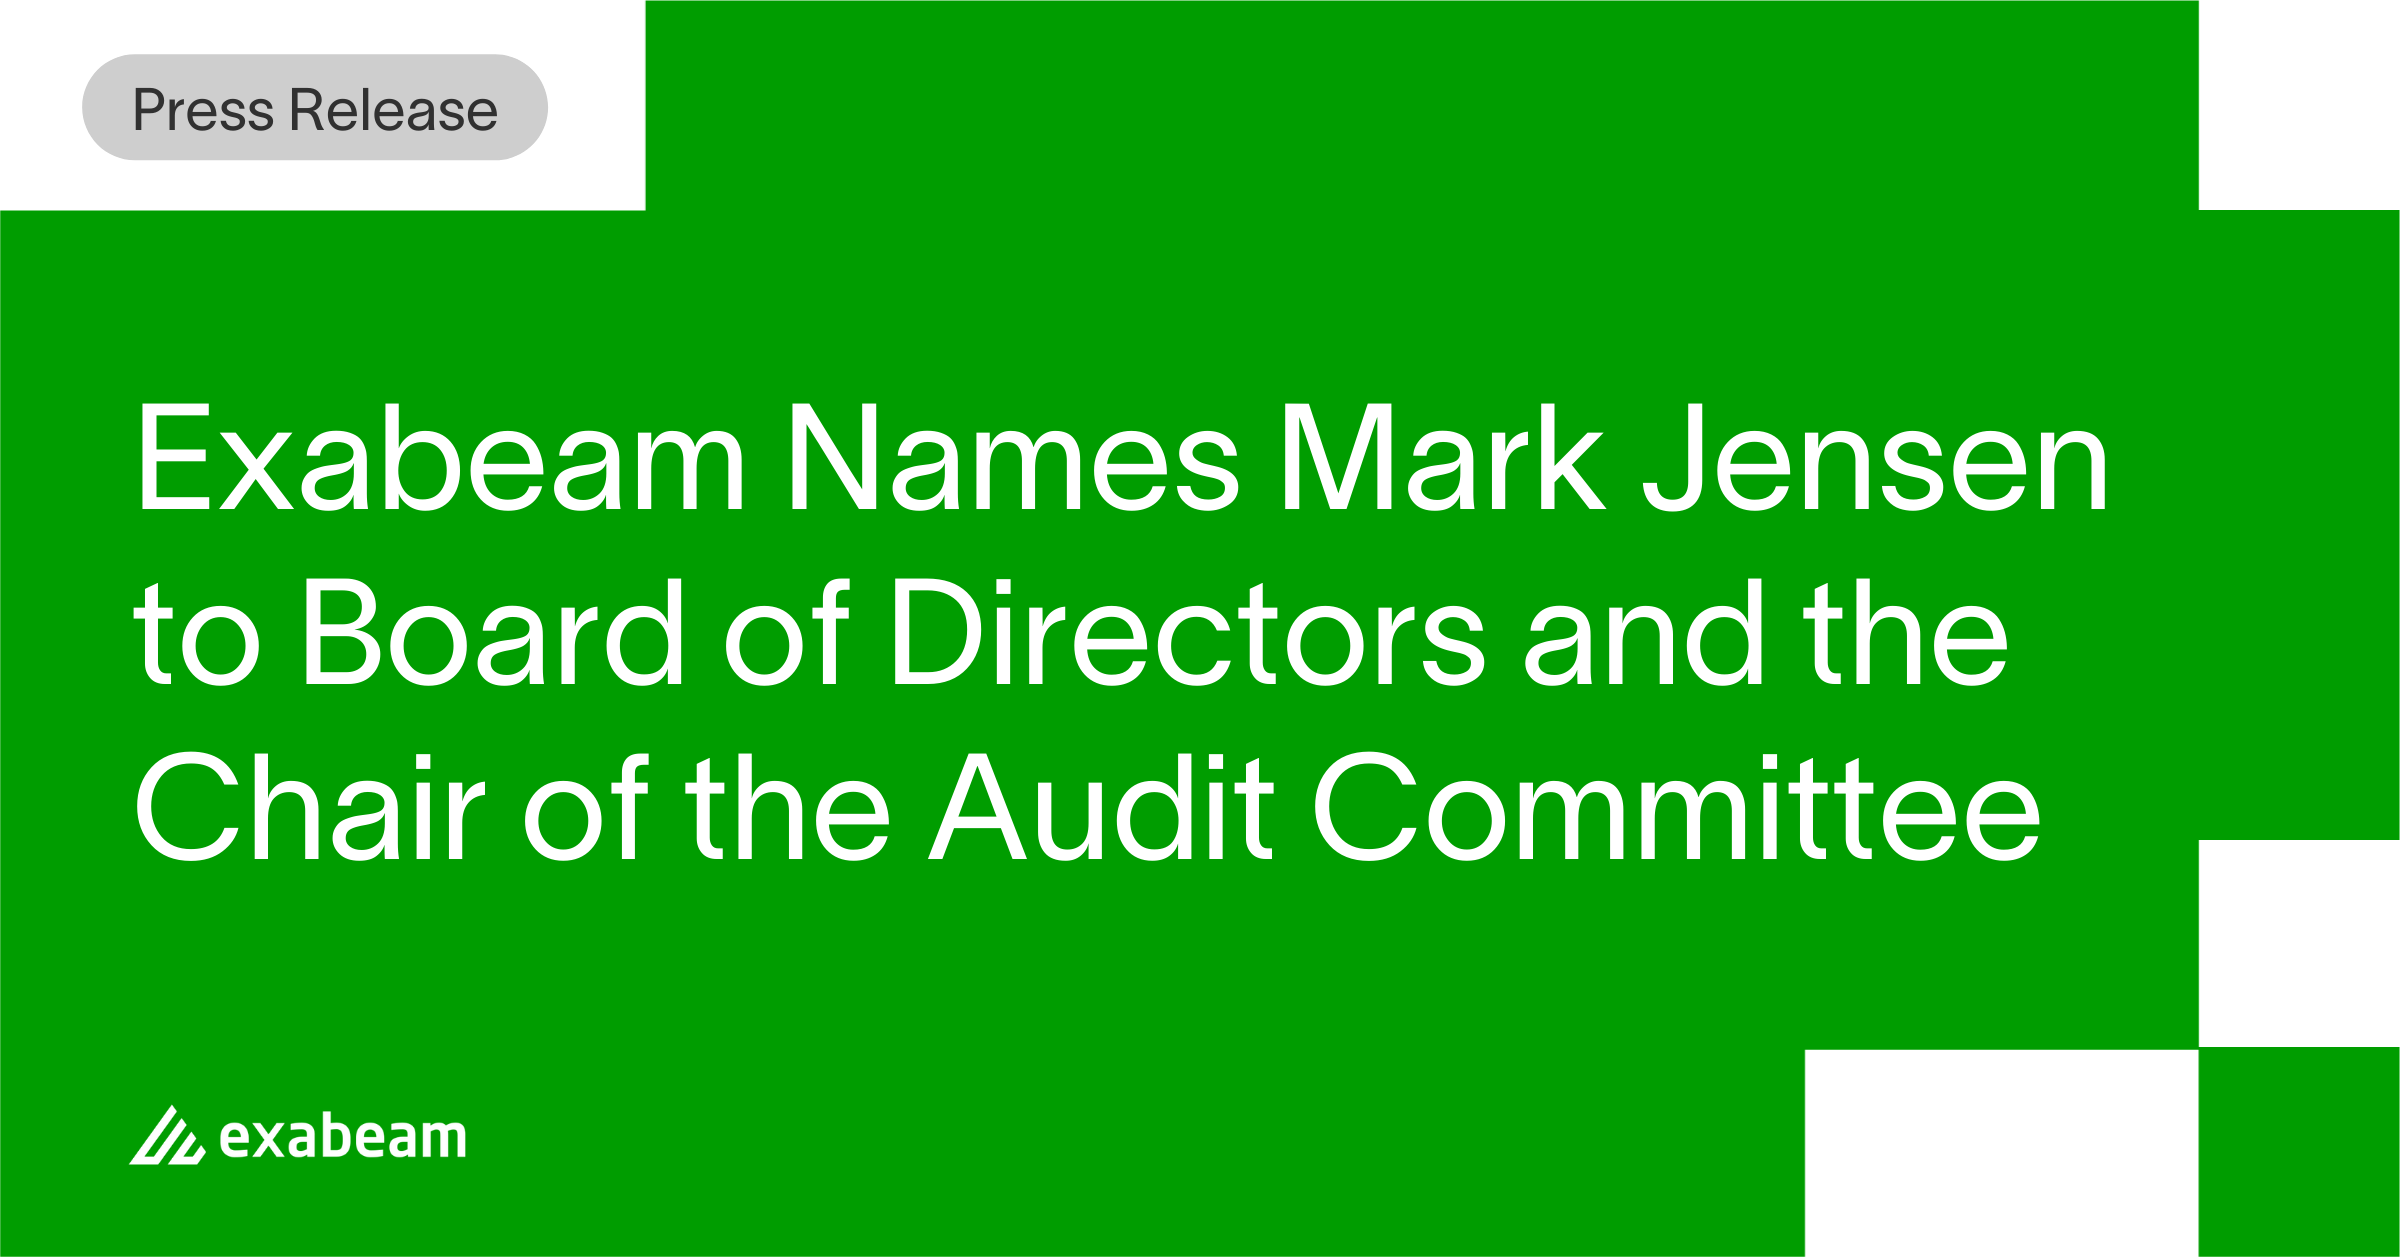 Exabeam Names Mark Jensen to Board of Directors and the Chair of the Audit Committee